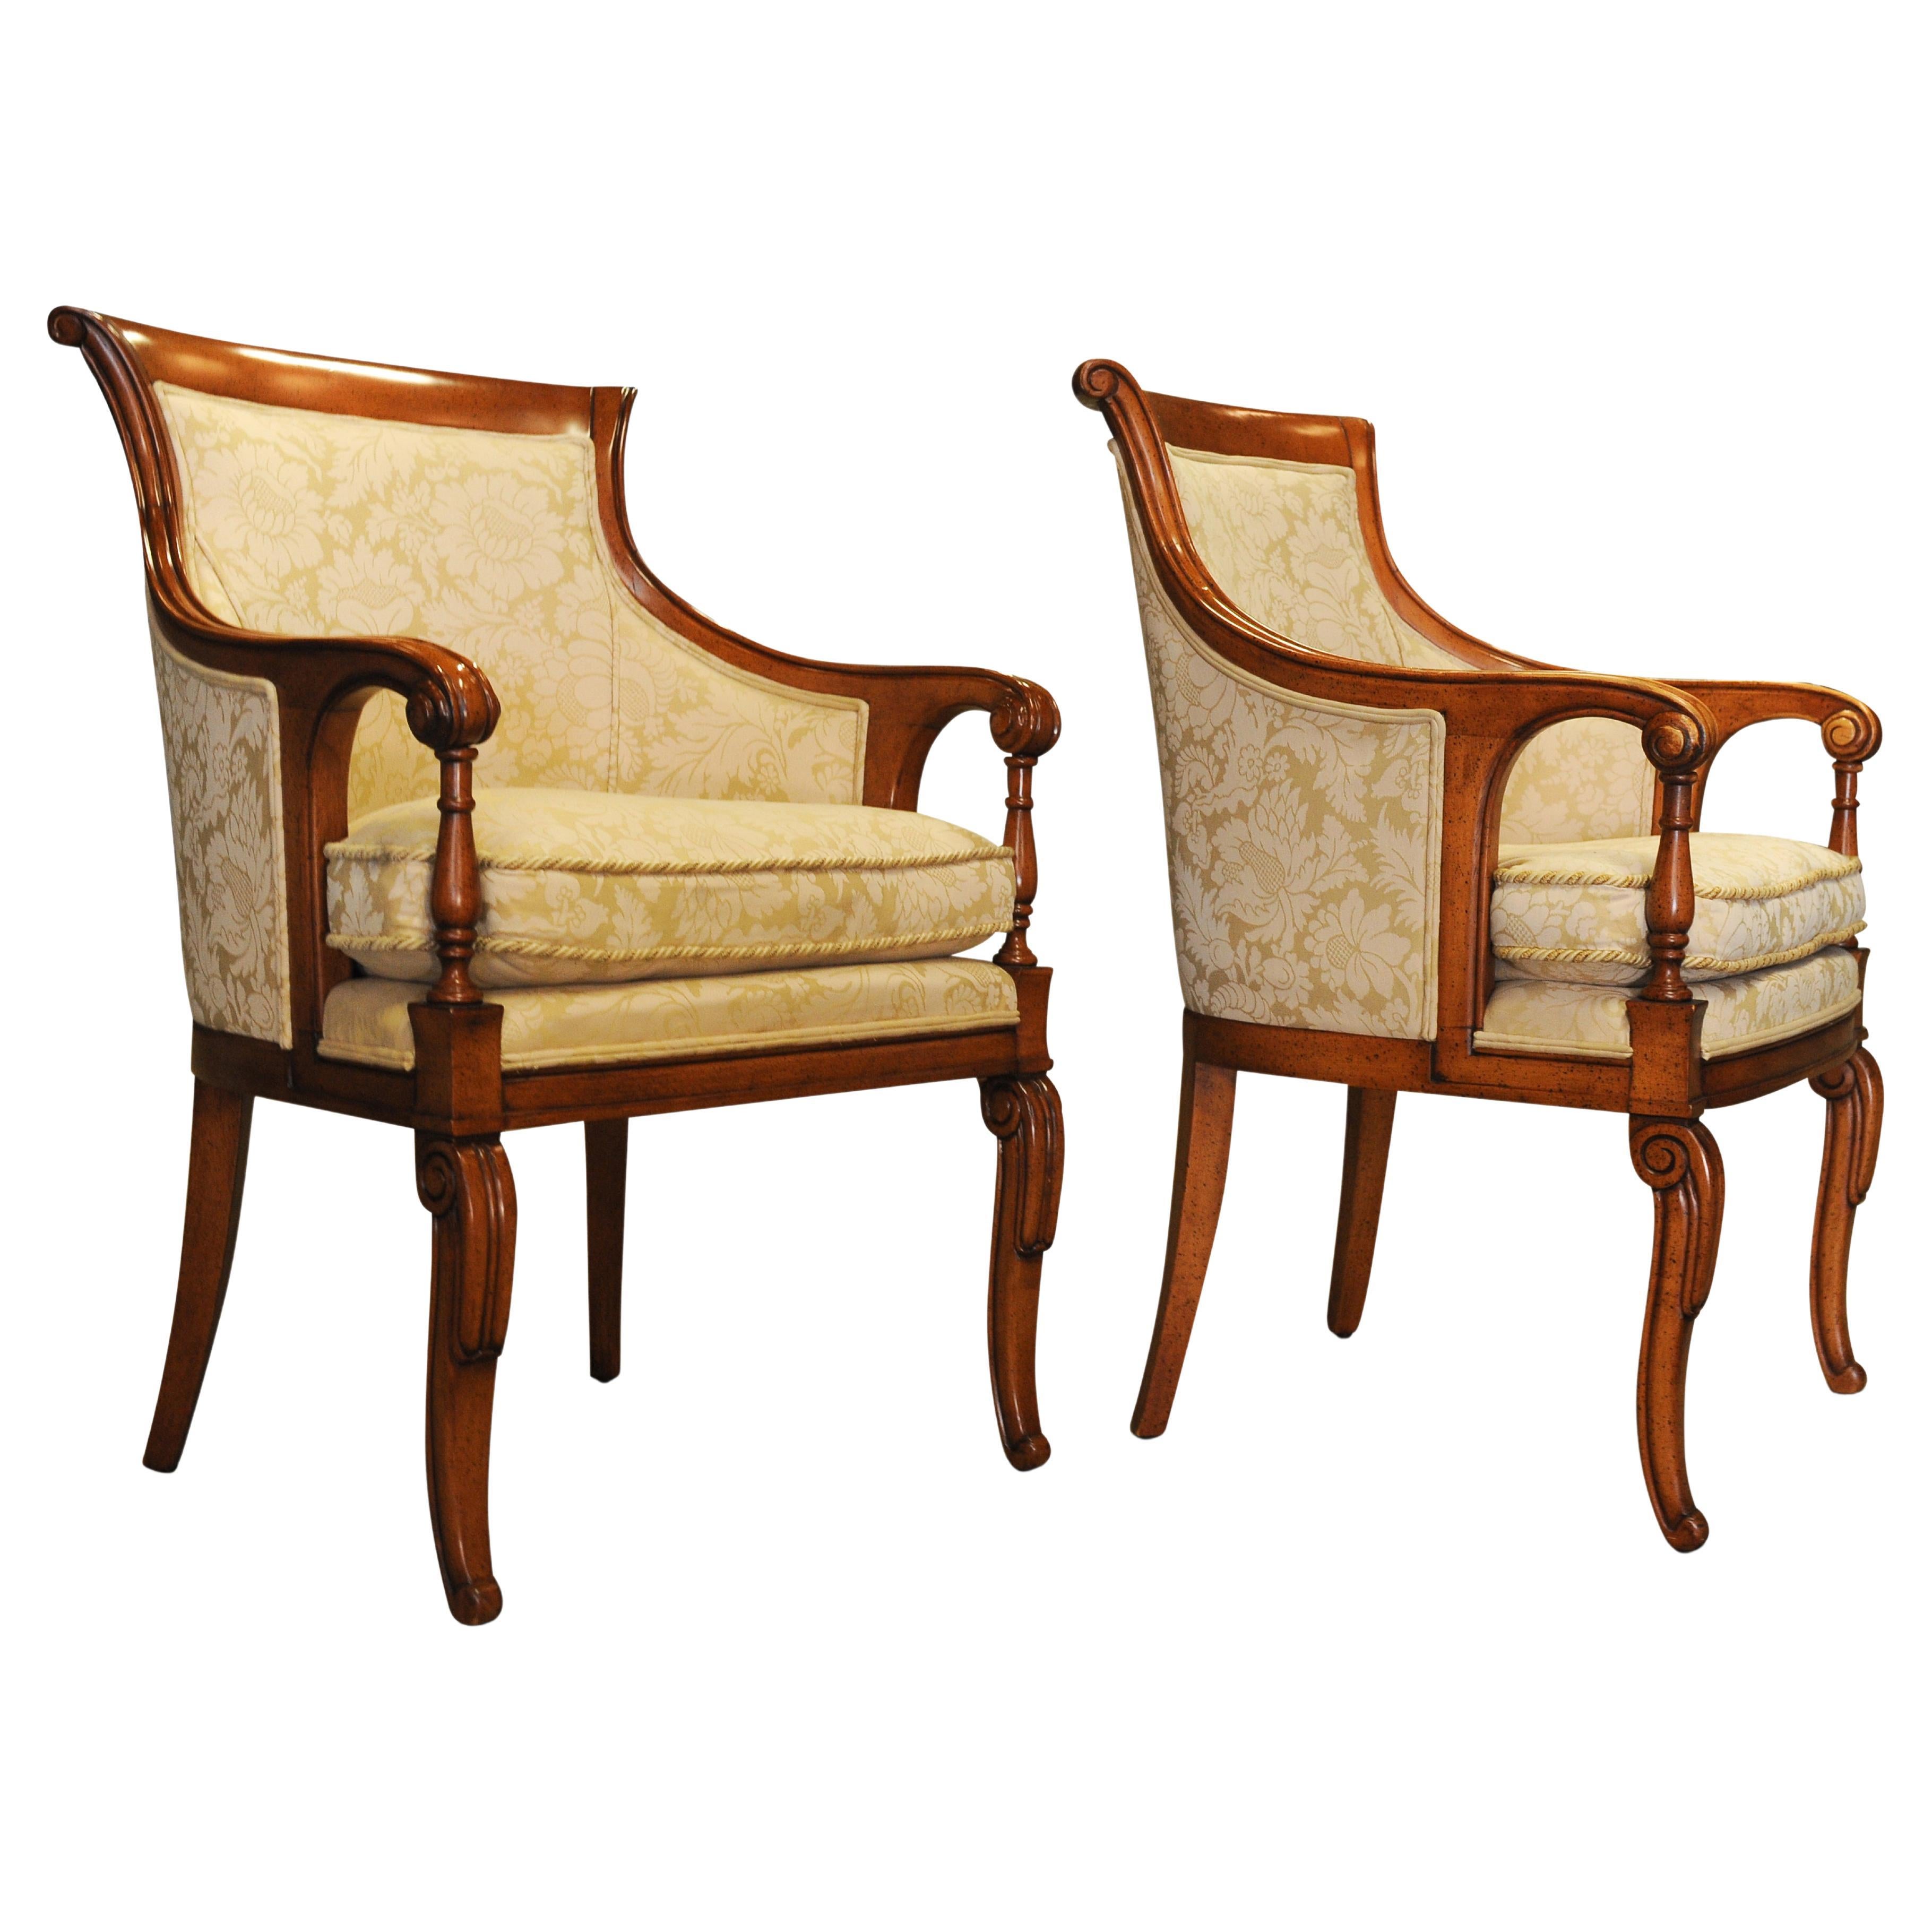 British Elegant Pair of William IV Design Bergere Armchairs With Cream Damask Upholstery For Sale